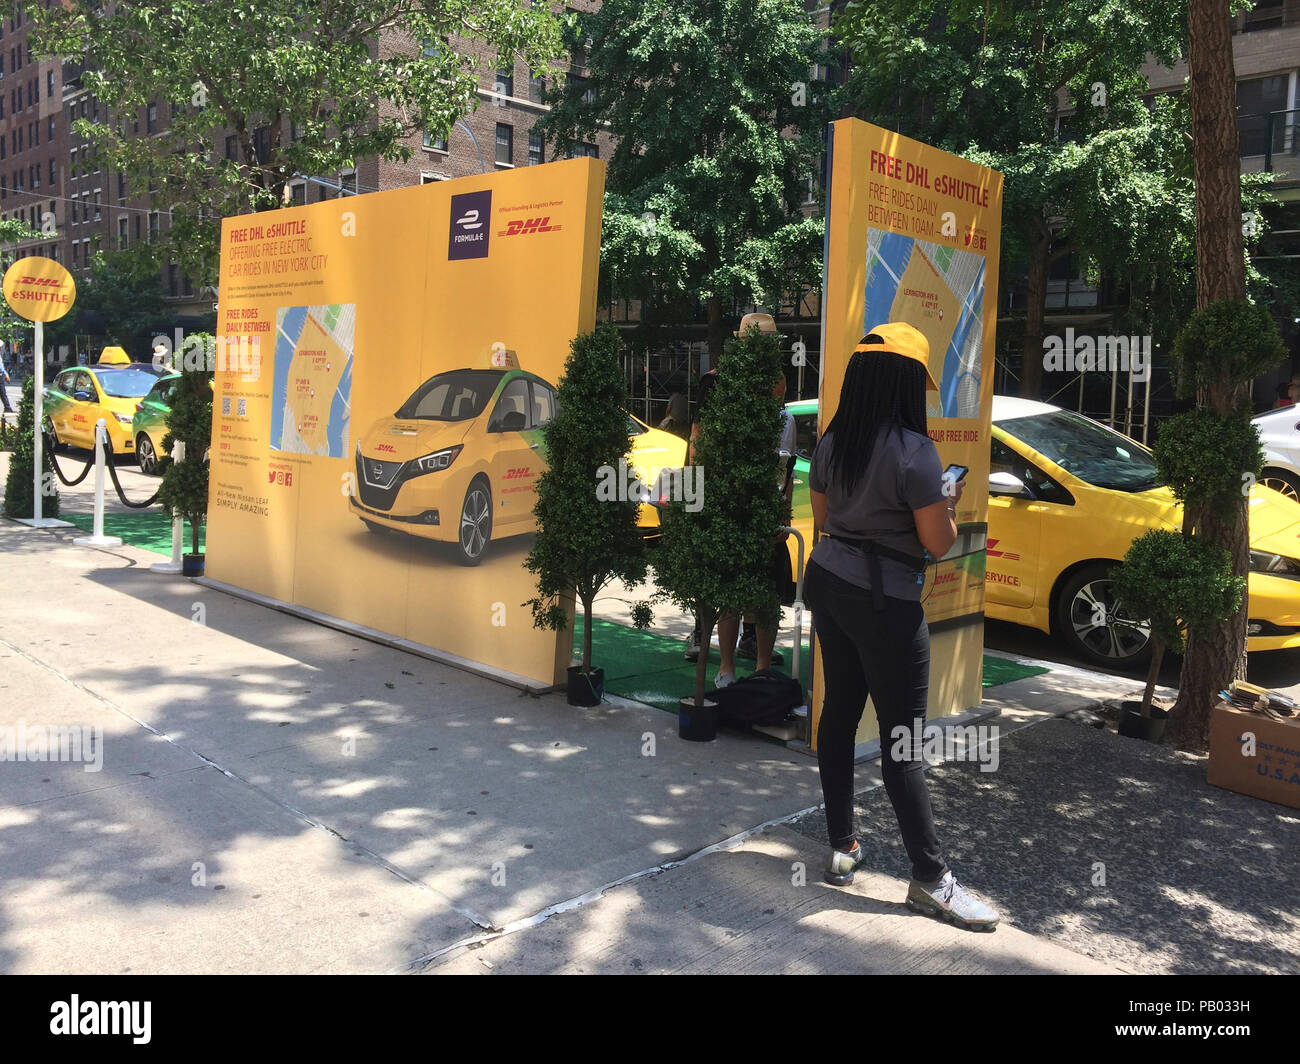 The DHL Formula E Eprix eShuttle promotion in the Greenwich Village neighborhood of New York on Friday, July 13, 2018. DHL's promotion, as part of their sponsorship of the Formual E Eprix electric racing car race, is offering free eShuttle rides in their fleet of Nissan Leafs. (Â© Frances M. Roberts) Stock Photo